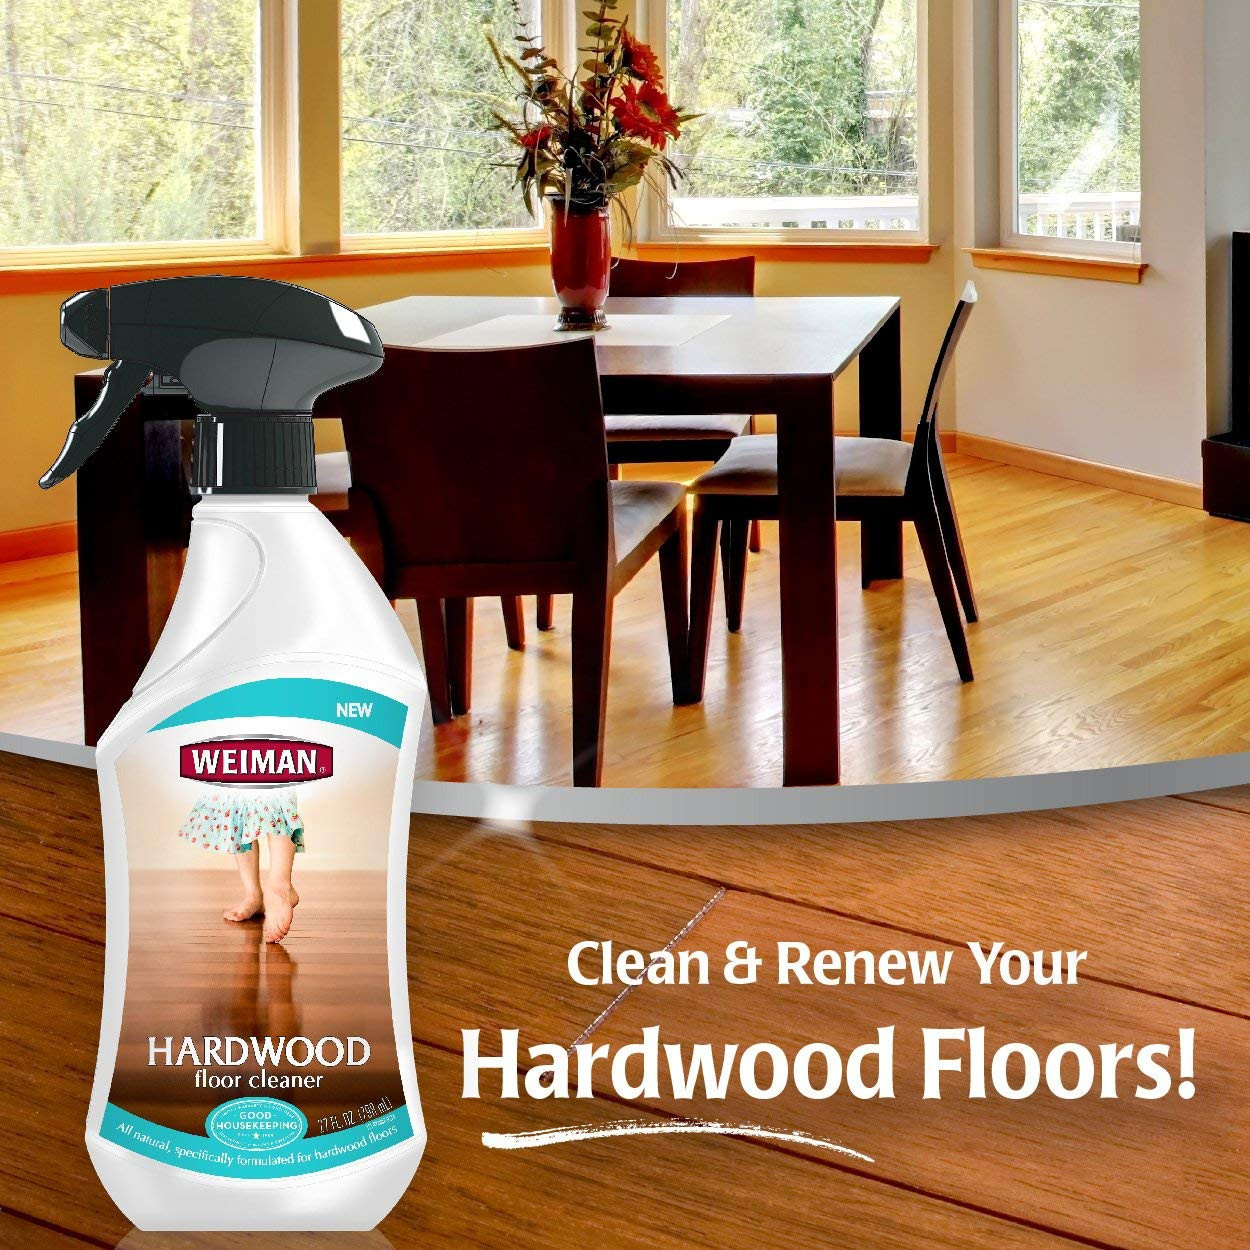 best vacuum for hardwood floors 2015 of amazon com weiman hardwood floor cleaner surface safe no harsh inside amazon com weiman hardwood floor cleaner surface safe no harsh scent safe for use around kids and pets residue free 27 oz trigger home kitchen